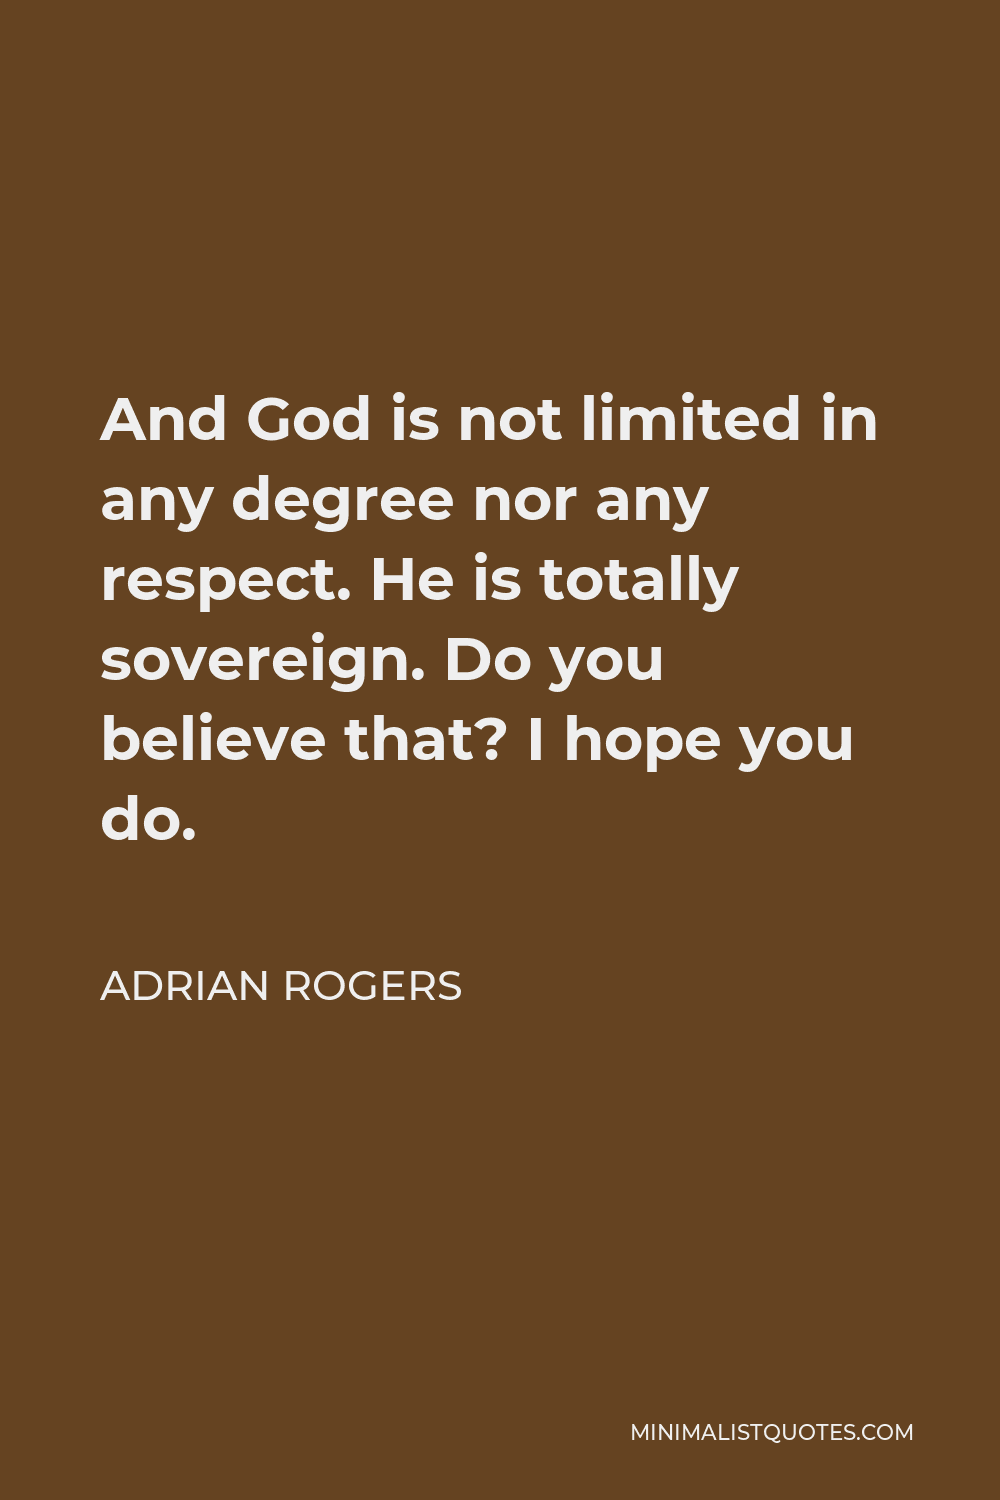 Adrian Rogers Quote - And God is not limited in any degree nor any respect. He is totally sovereign. Do you believe that? I hope you do.